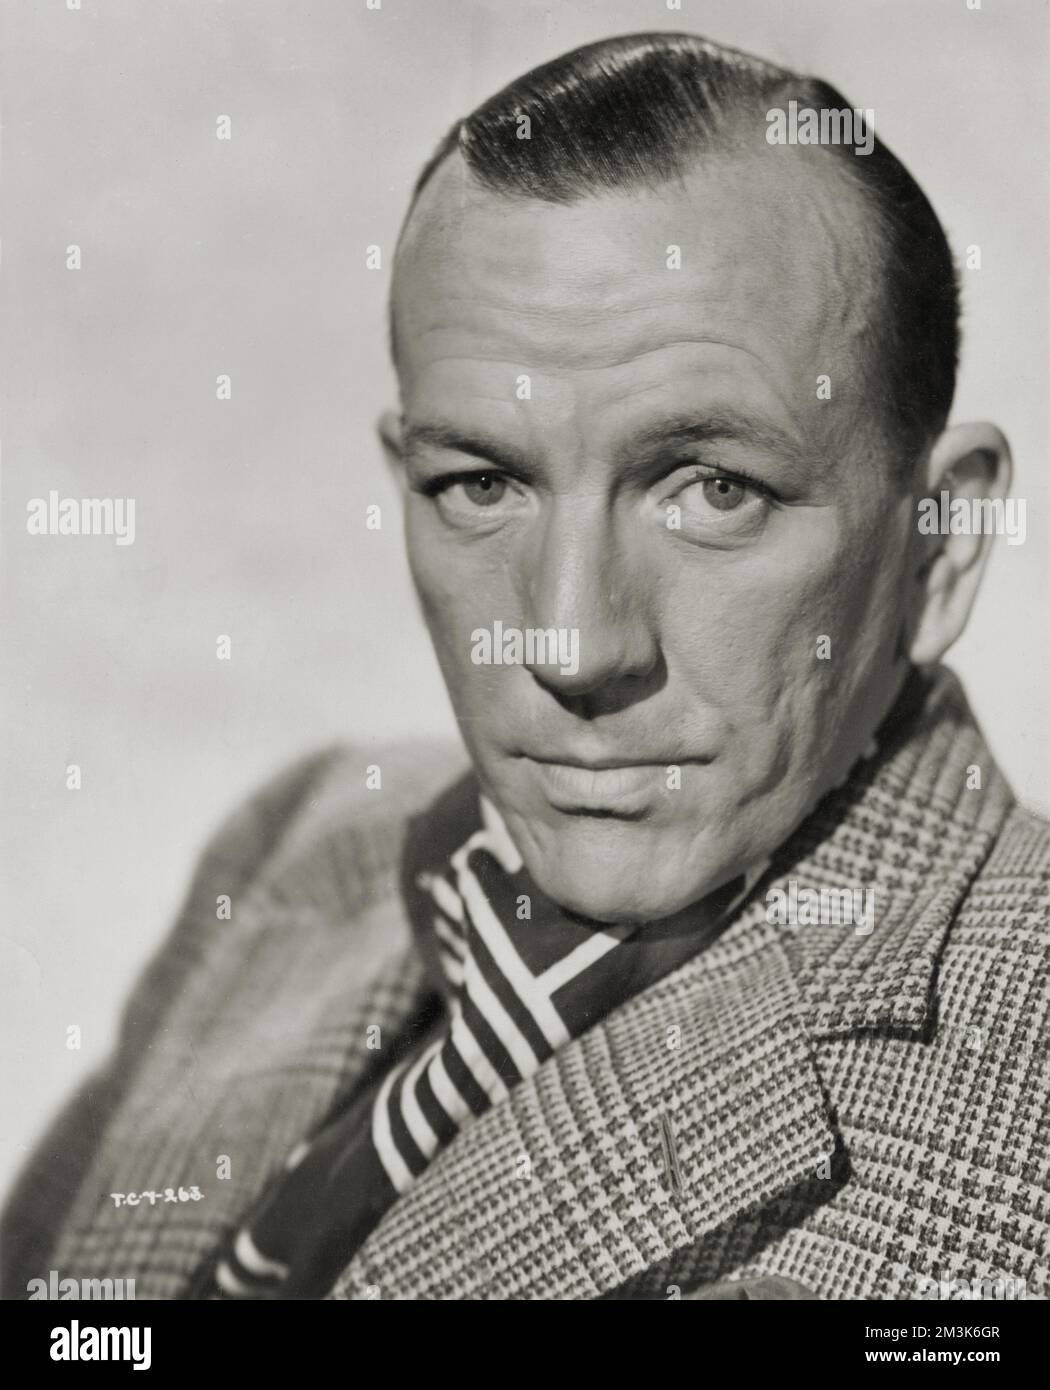 Photographic portrait of Noel Coward (1899-1973), the English playwright, actor and composer, in 1942, shortly after the release of 'In Which We Serve'. Stock Photo